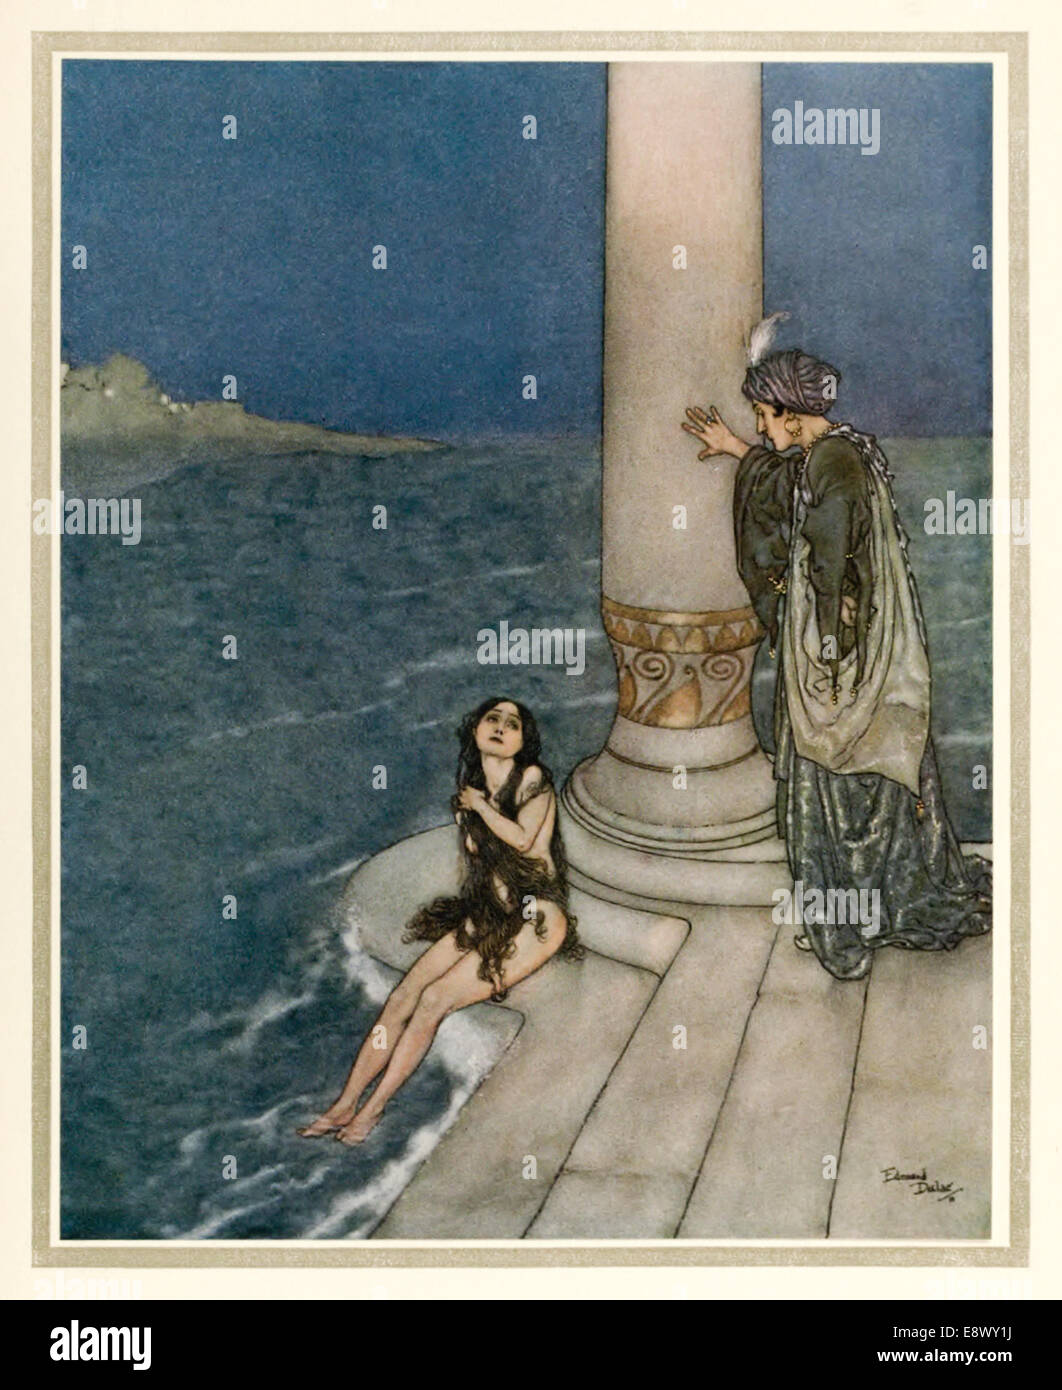 Little Mermaid - Edmund Dulac (1882-1953) illustration from ‘Stories from Hans Andersen’. See description for more information. Stock Photo